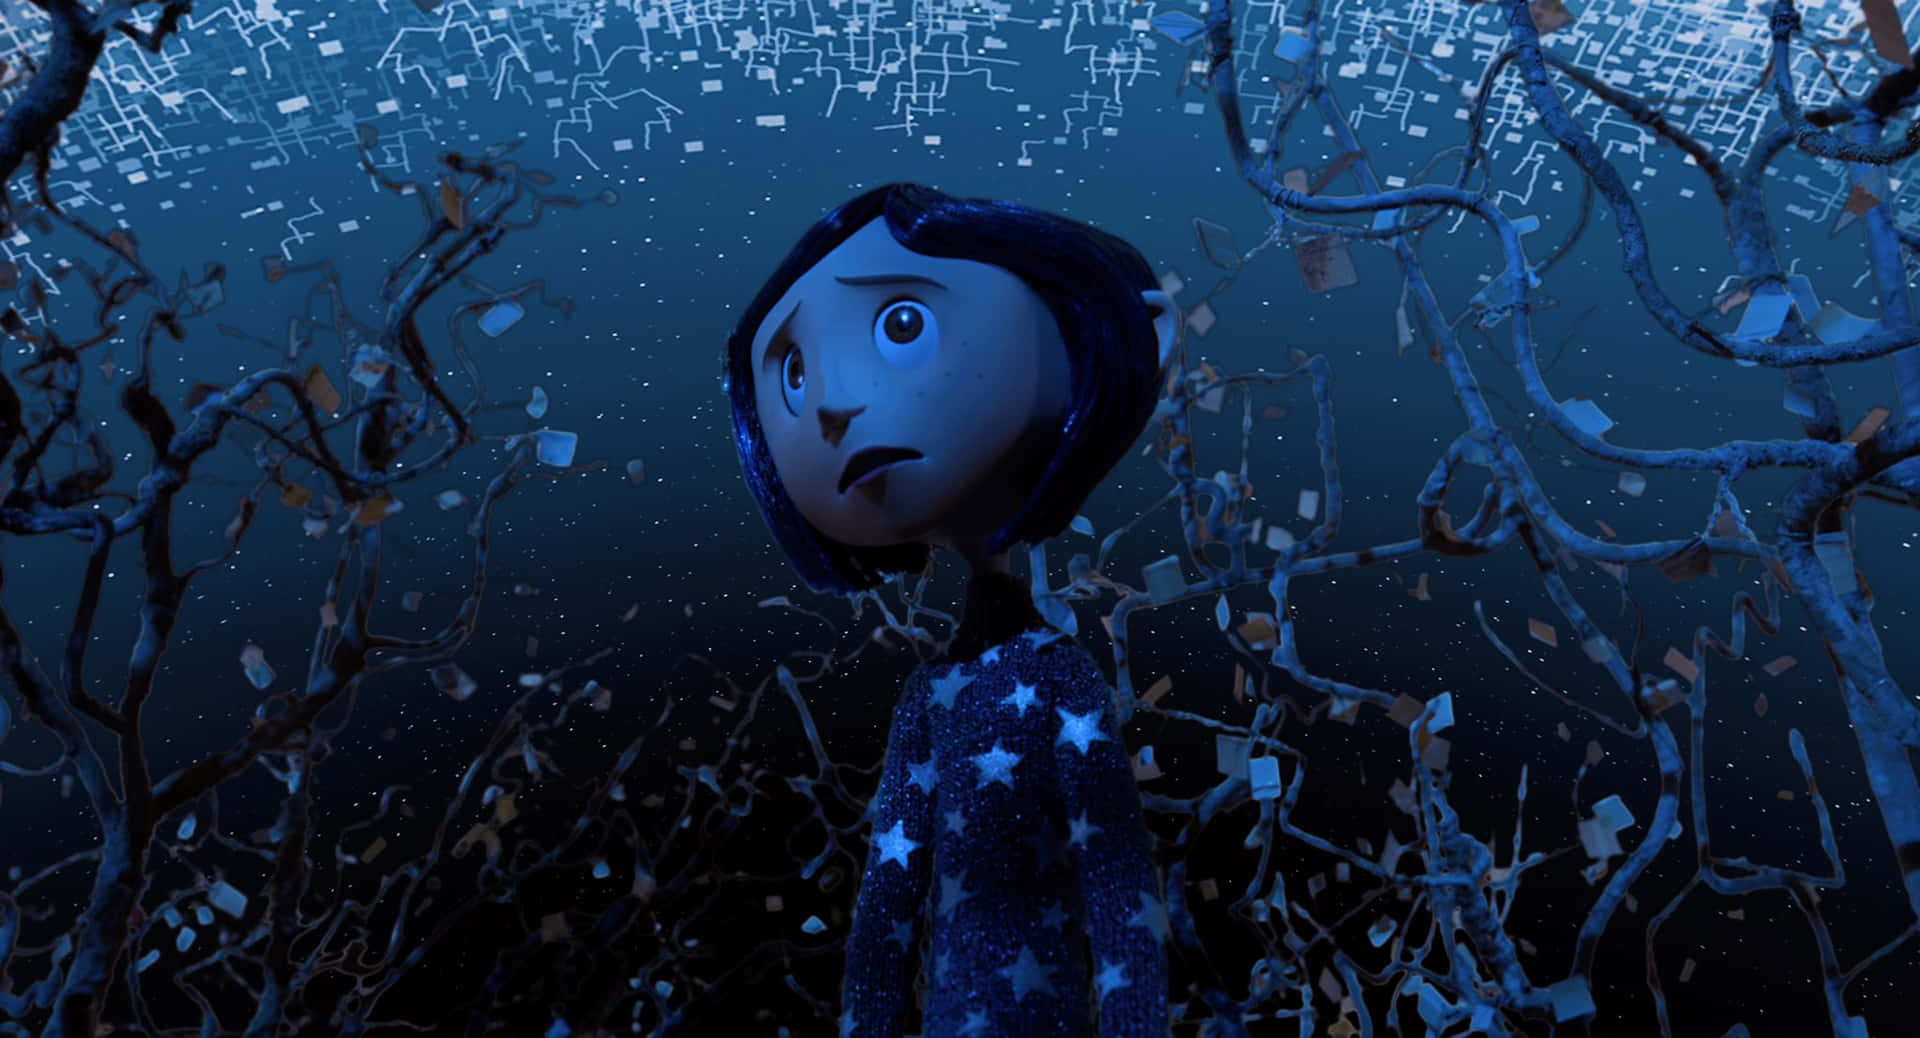 Coraline discovers the door to a strange other world